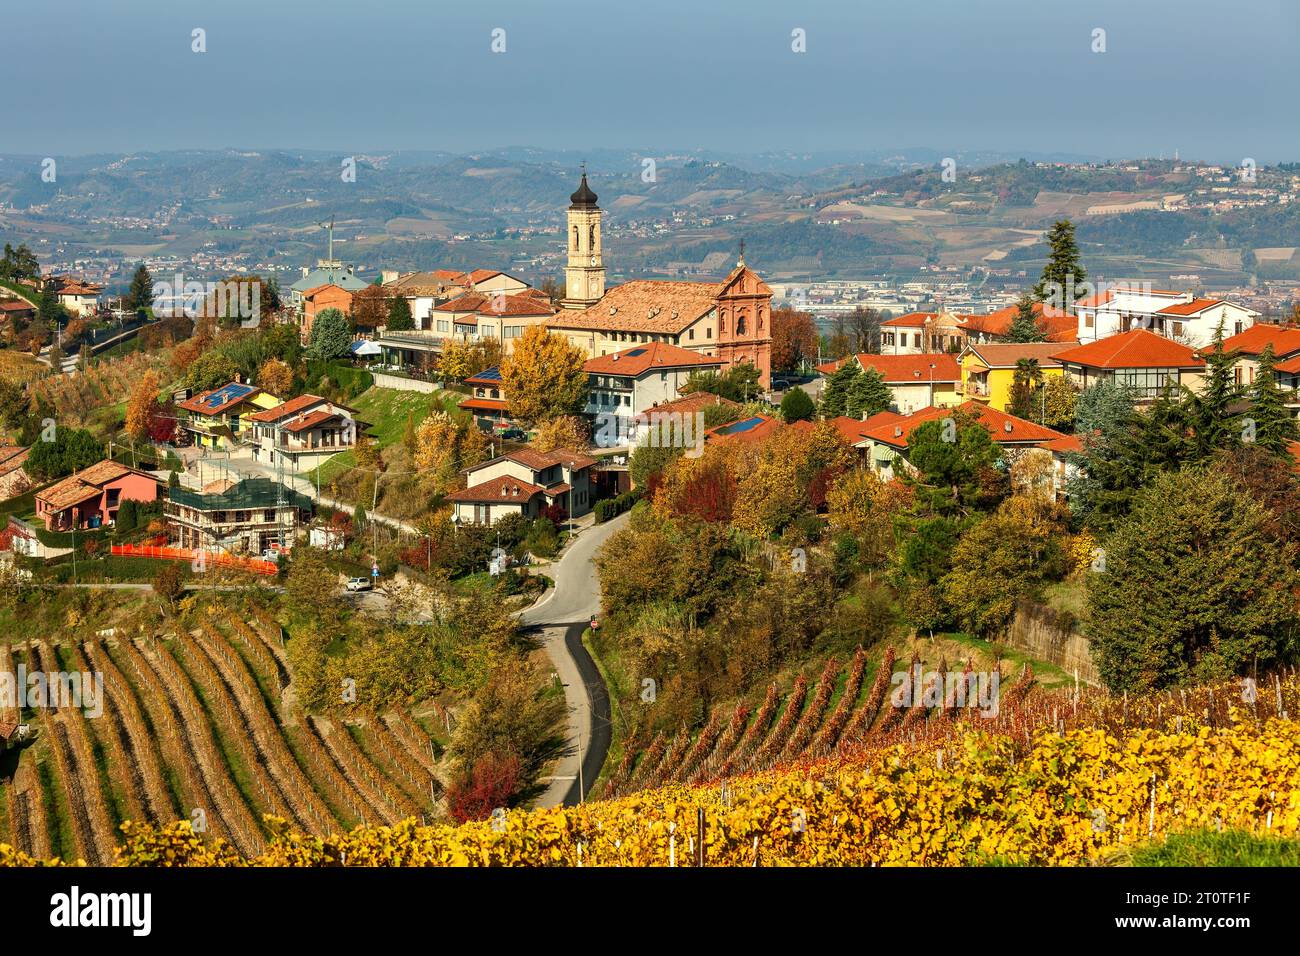 View of the small town of Treiso among colorful autumnal trees and vineyards in Piedmont, Italy. Stock Photo